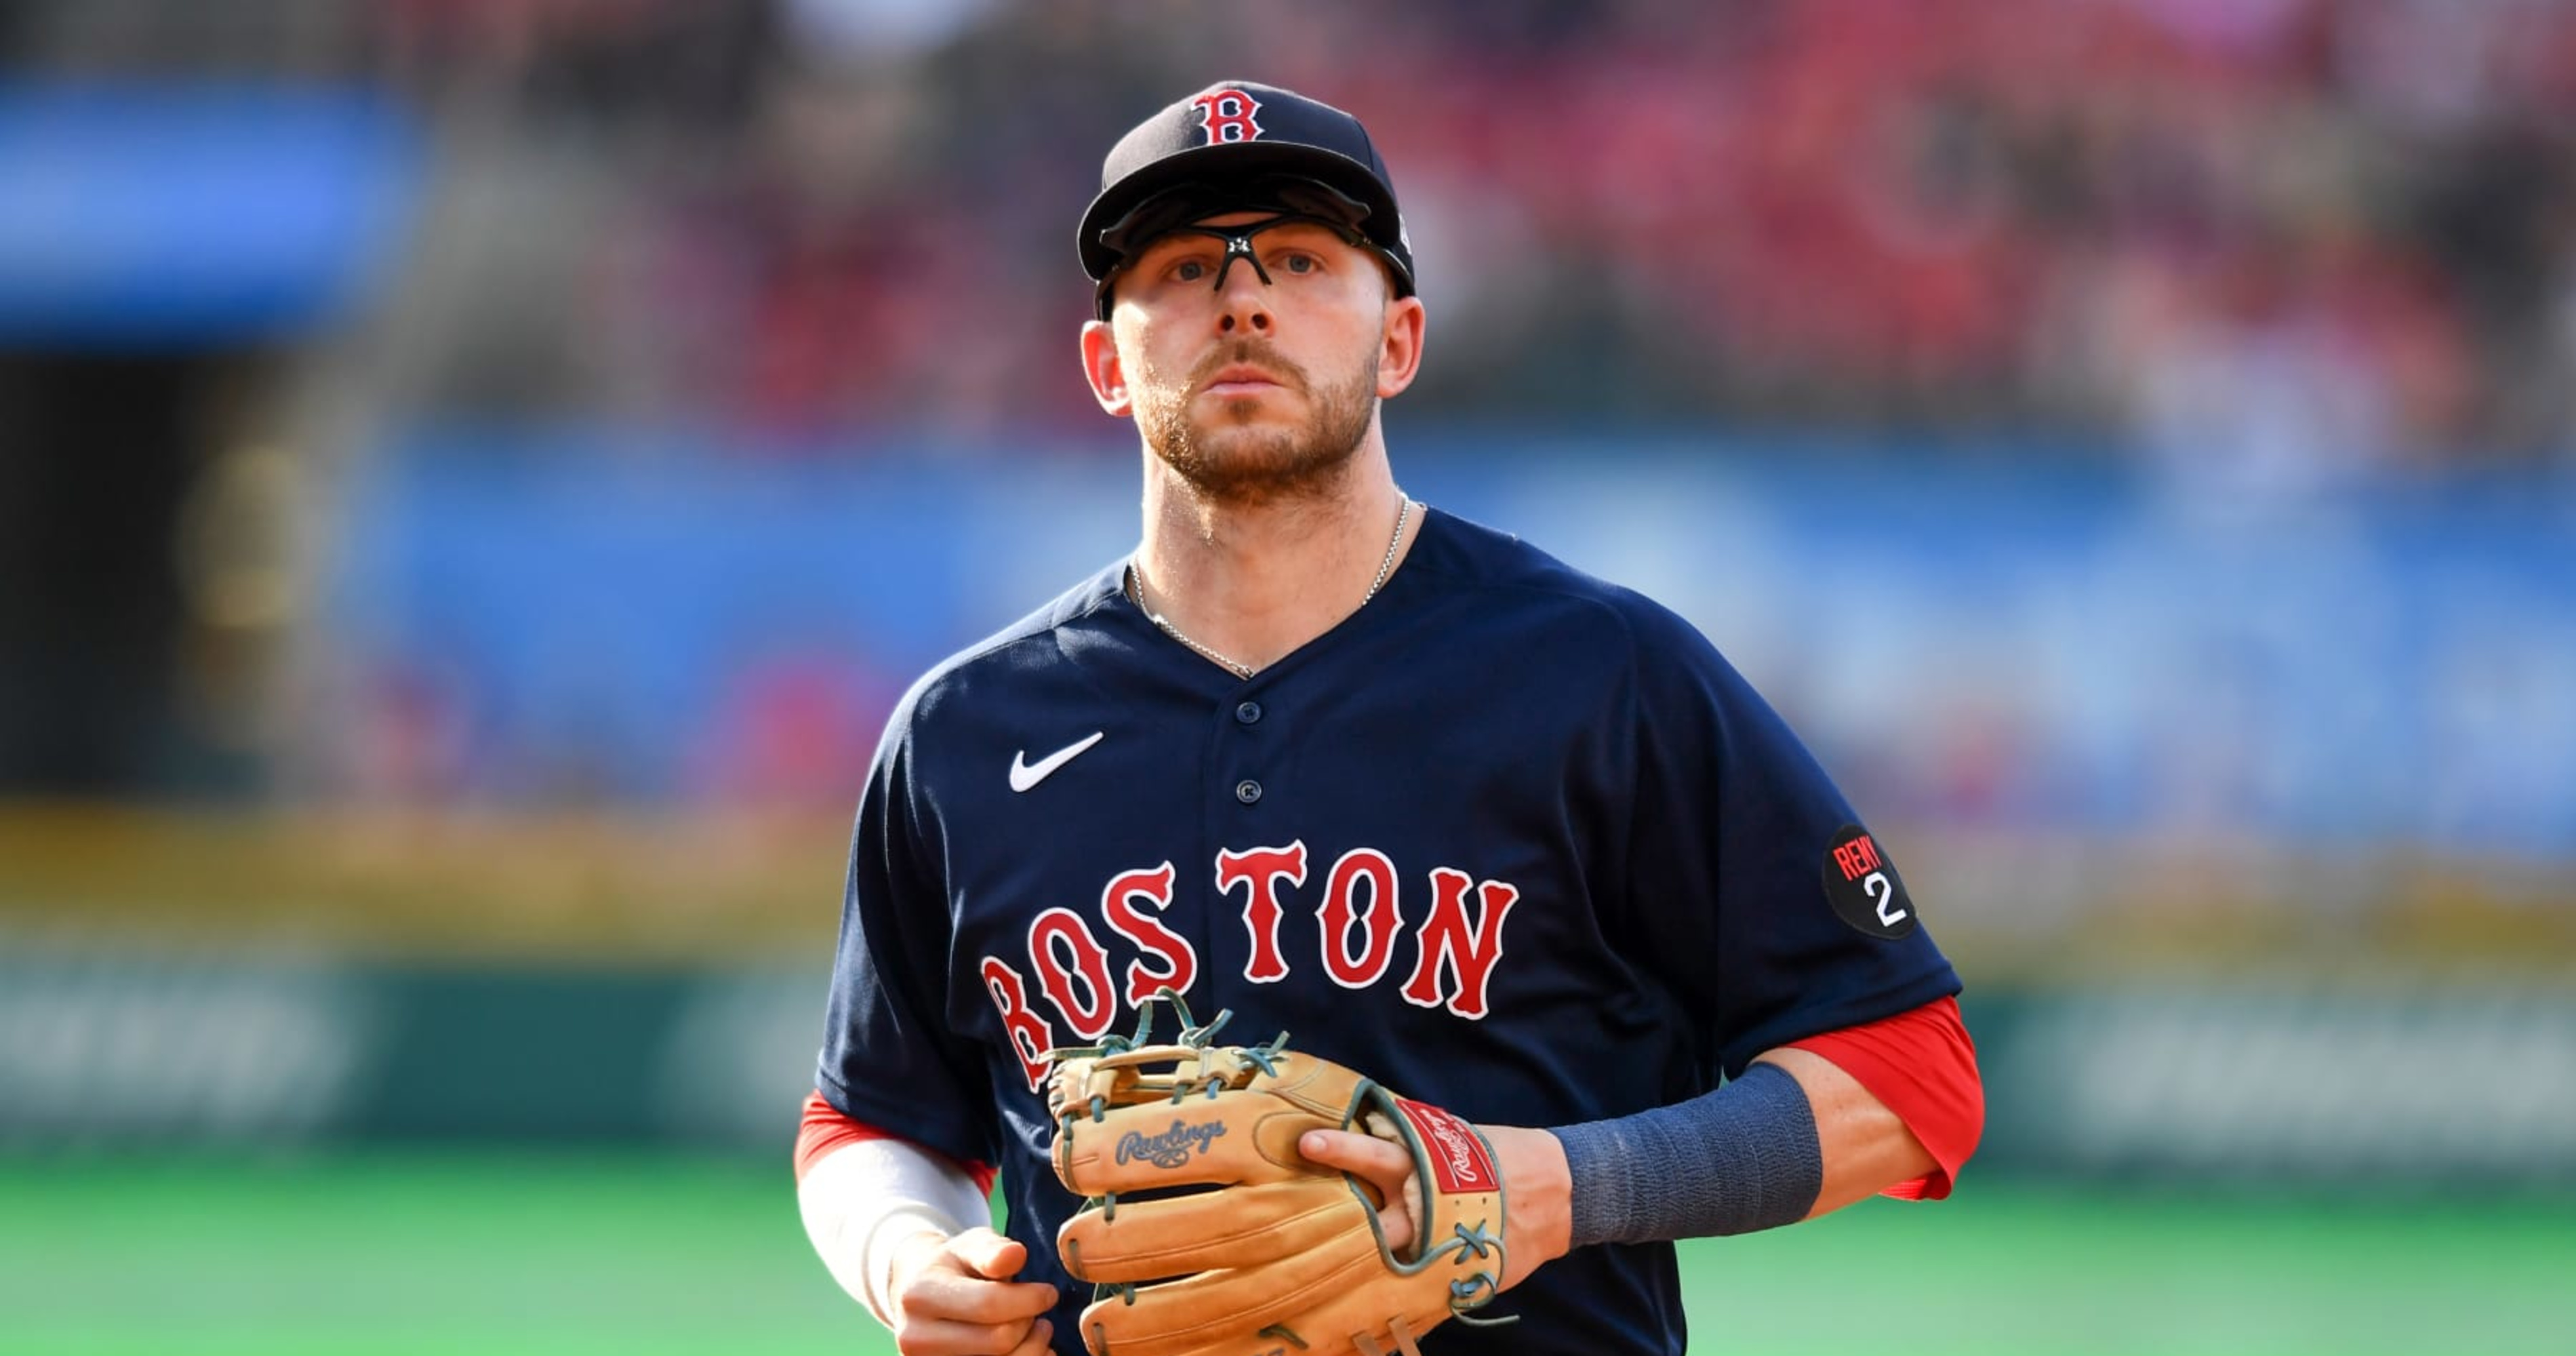 Trevor Story returns to Red Sox lineup after missing team's first